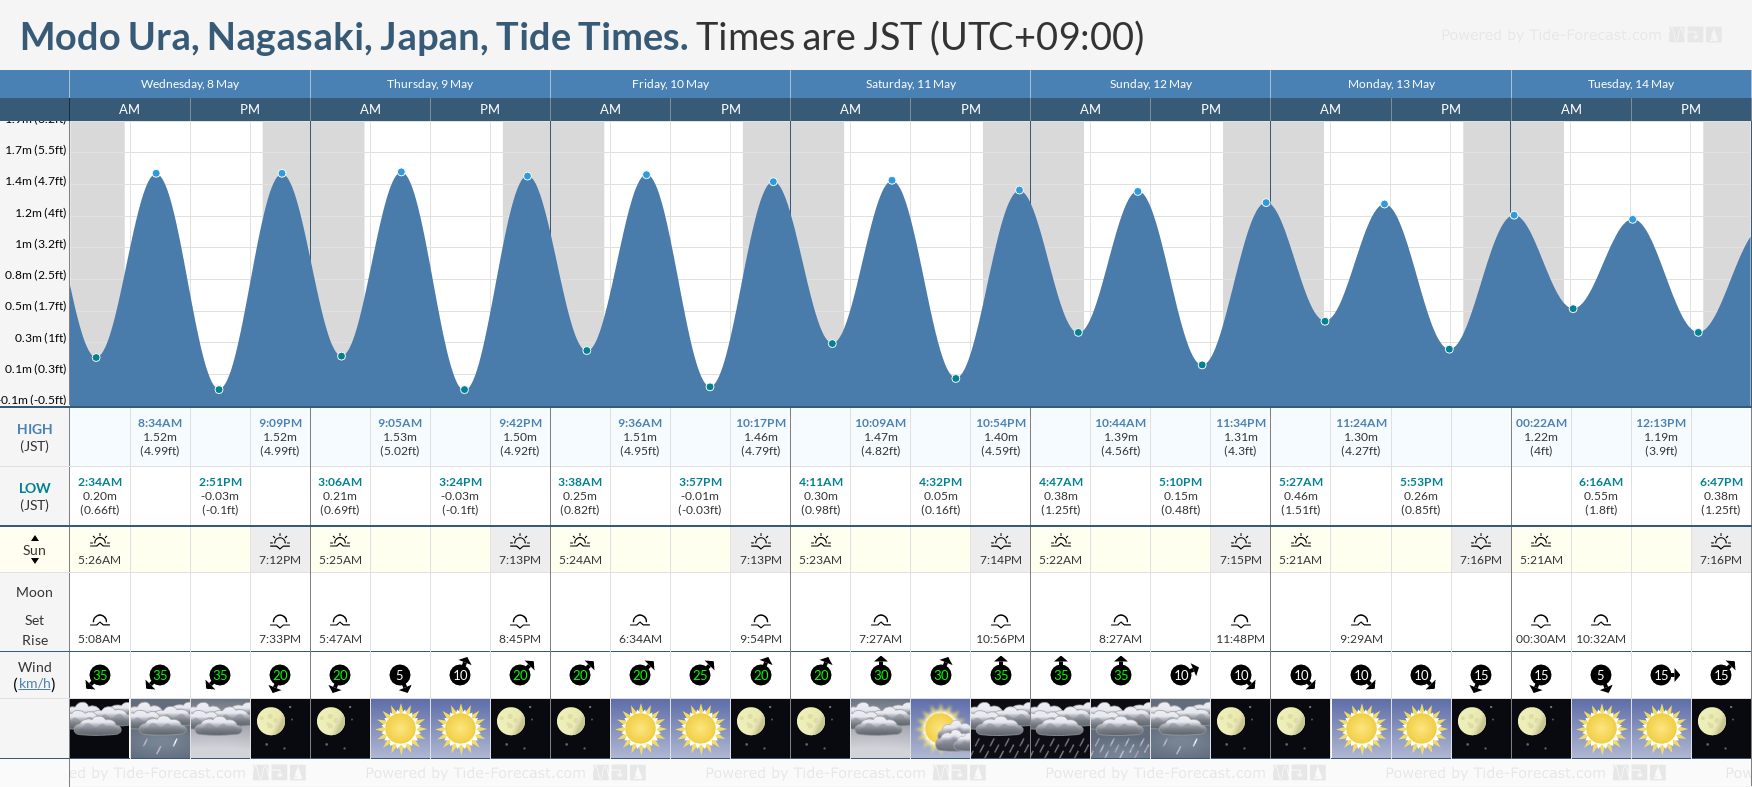 Modo Ura, Nagasaki, Japan Tide Chart including high and low tide tide times for the next 7 days